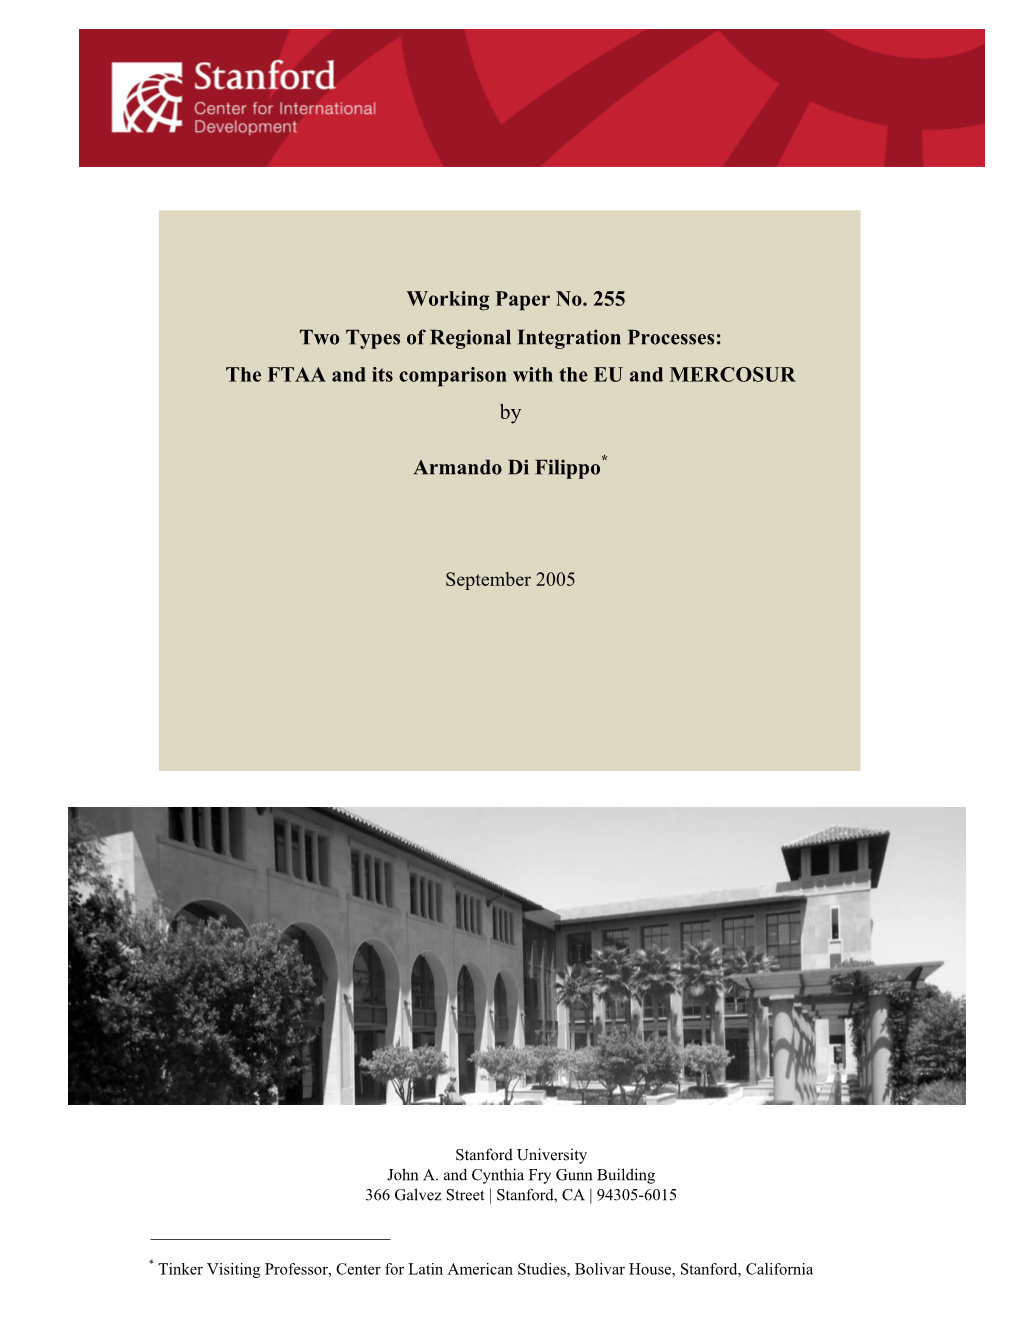 Working Paper No. 255 Two Types of Regional Integration Processes: the FTAA and Its Comparison with the EU and MERCOSUR By